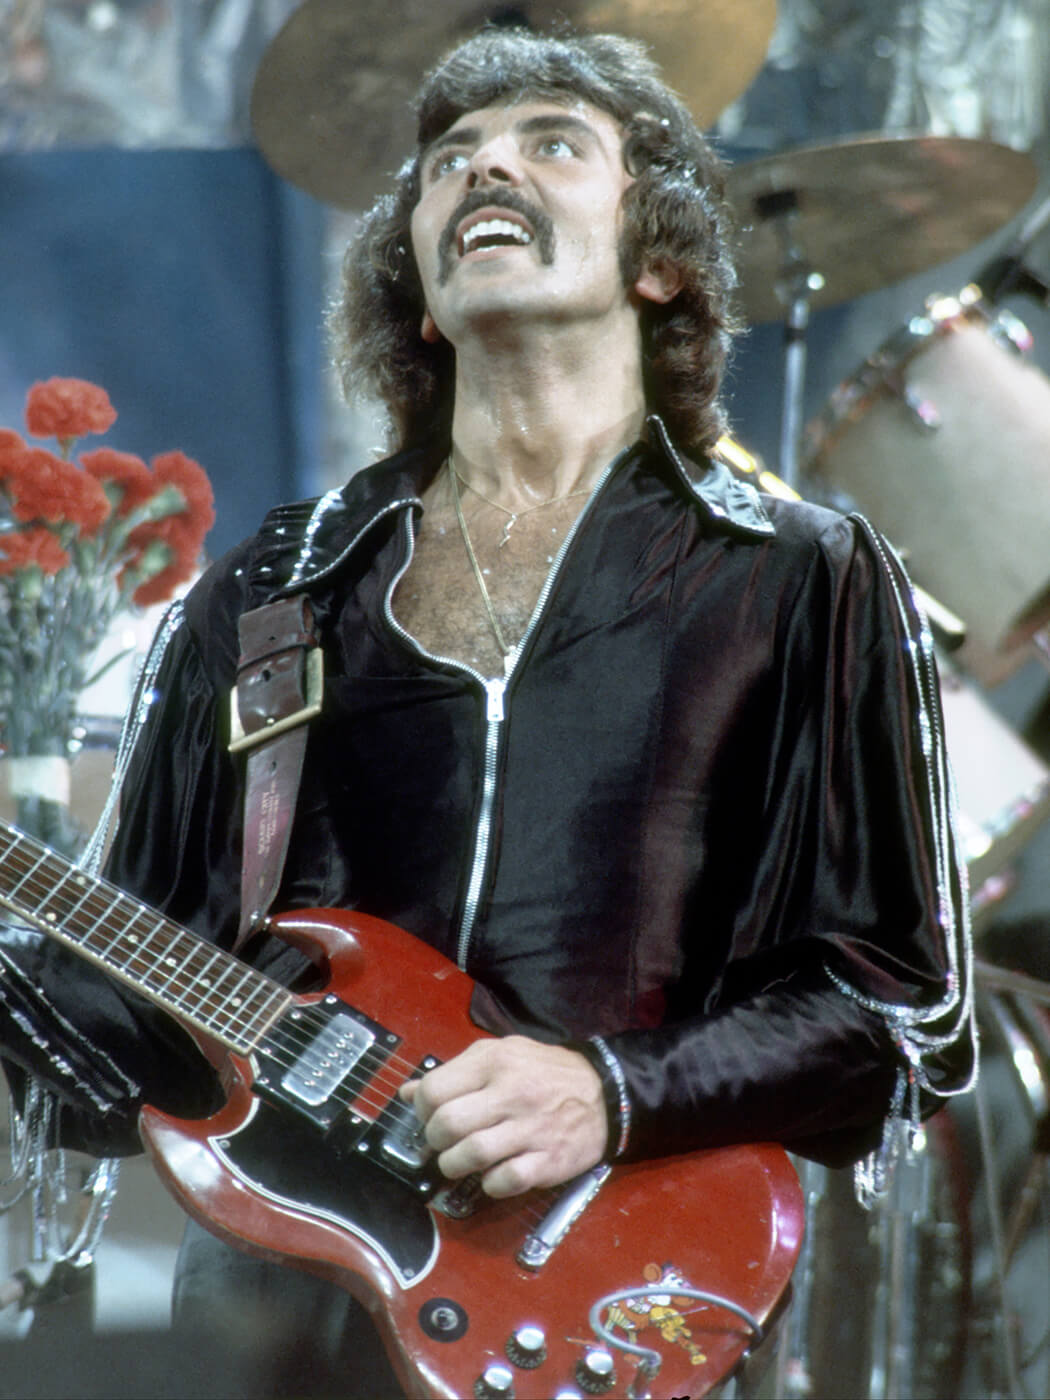 Tony Iommi performing with Black Sabbath in 1970. He plays a Gibson SG, photo by Michael Ochs Archives/Stringer via Getty Images